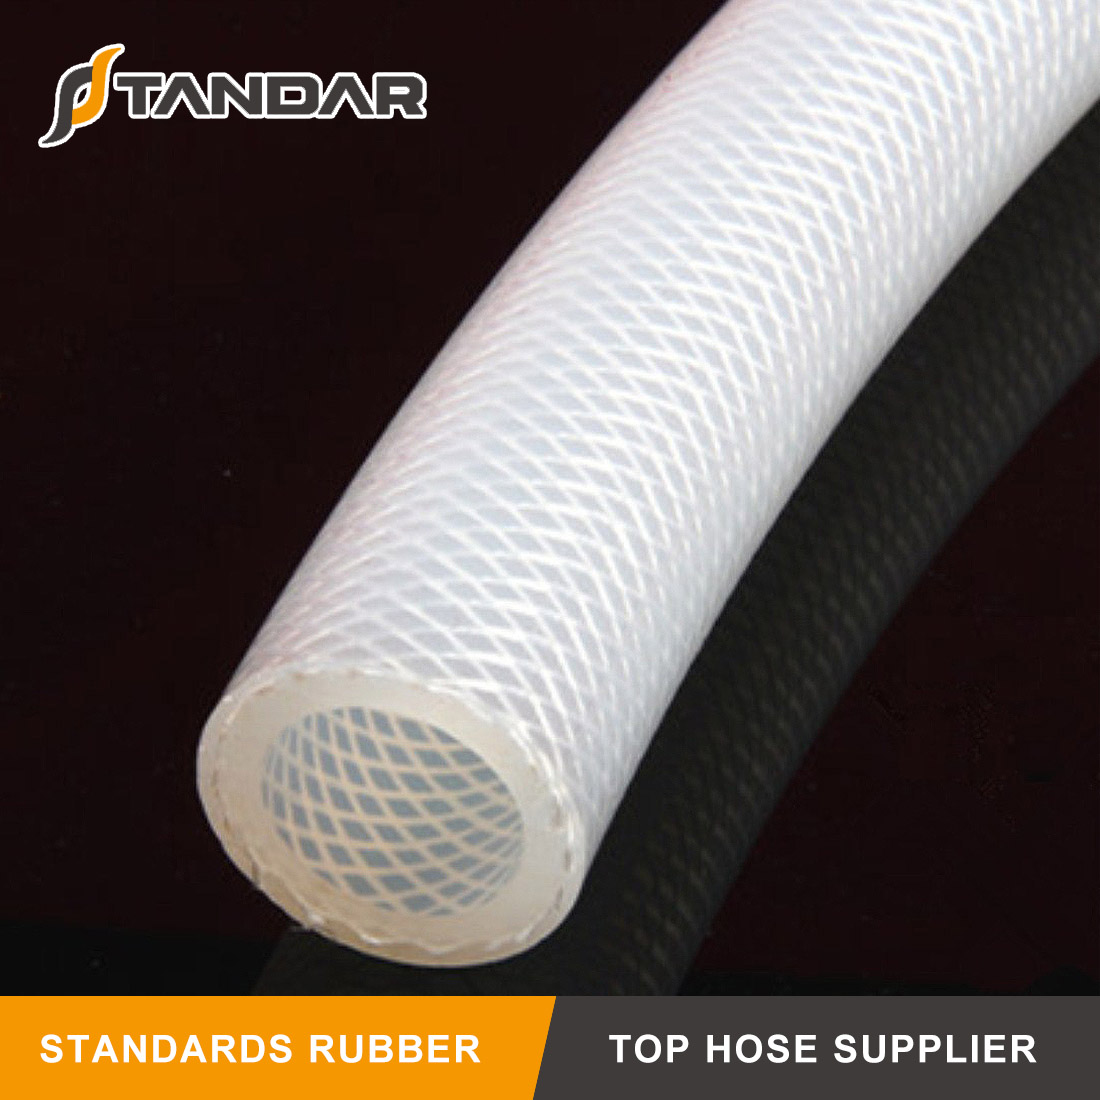 High Pressure soft clear reinforced platinum cured thin wall FDA Food Grade Silicone rubber tubing